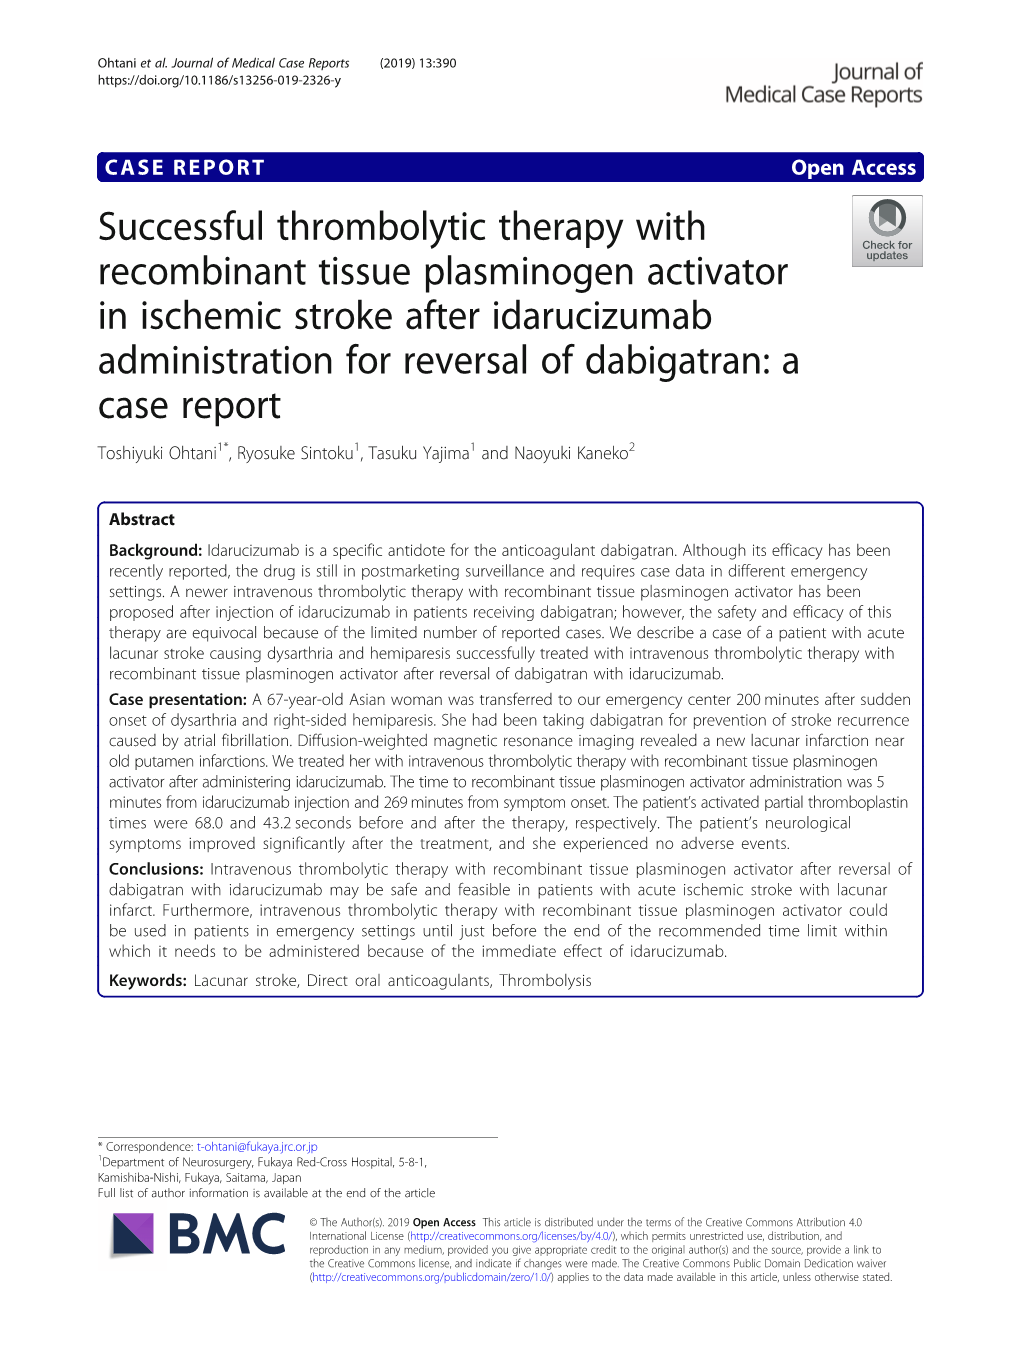 Successful Thrombolytic Therapy with Recombinant Tissue Plasminogen